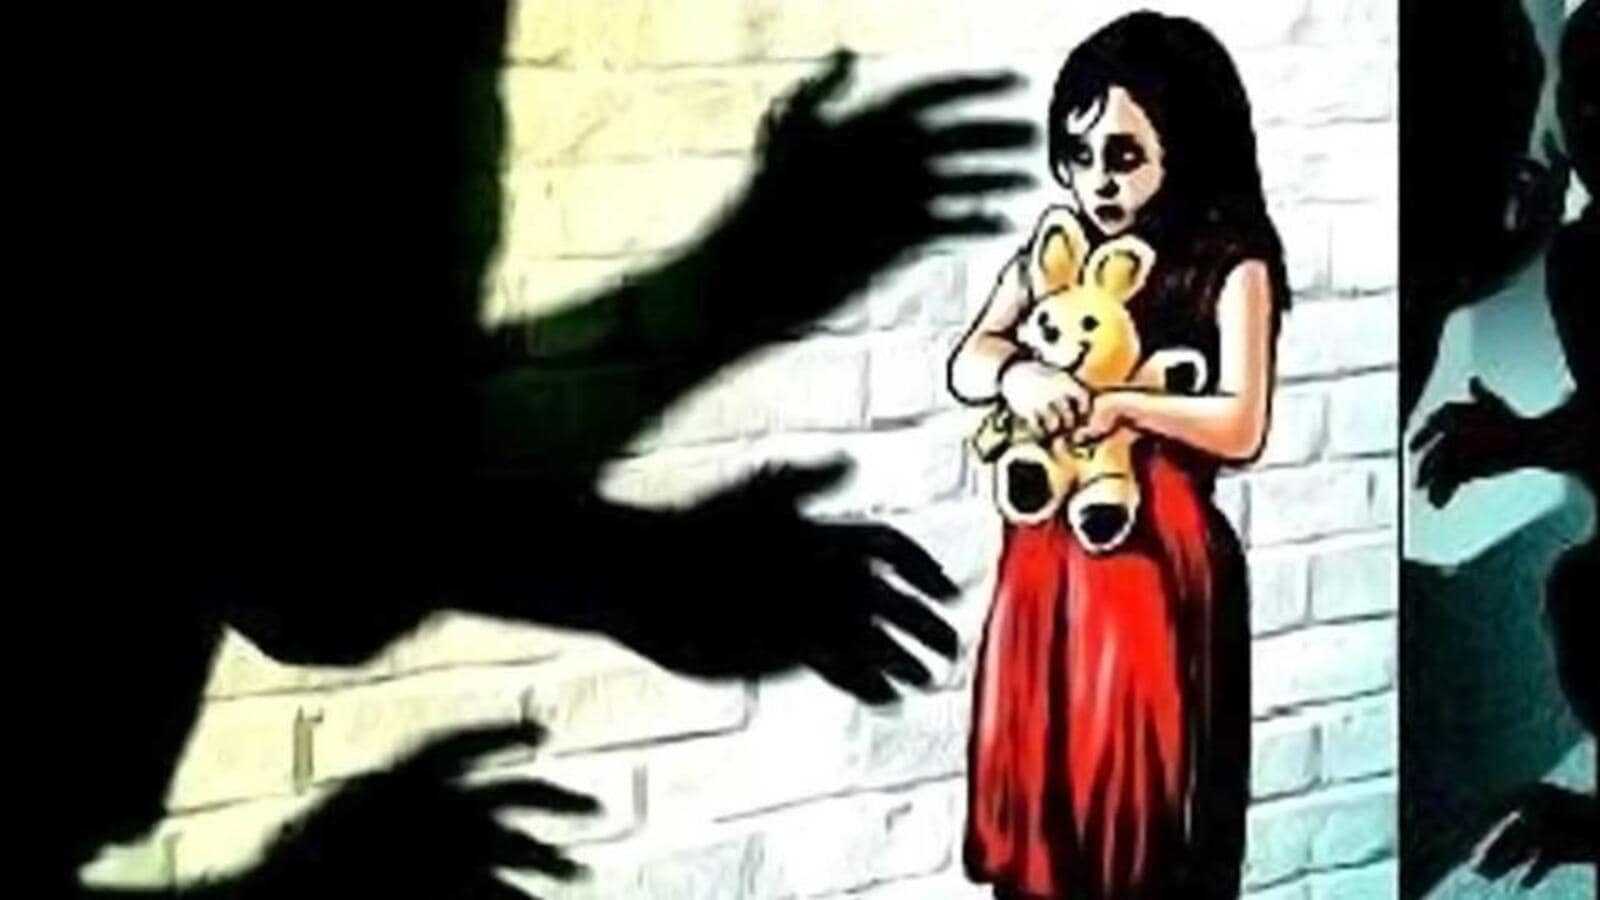 Assam: Gang rape accused killed in police encounter